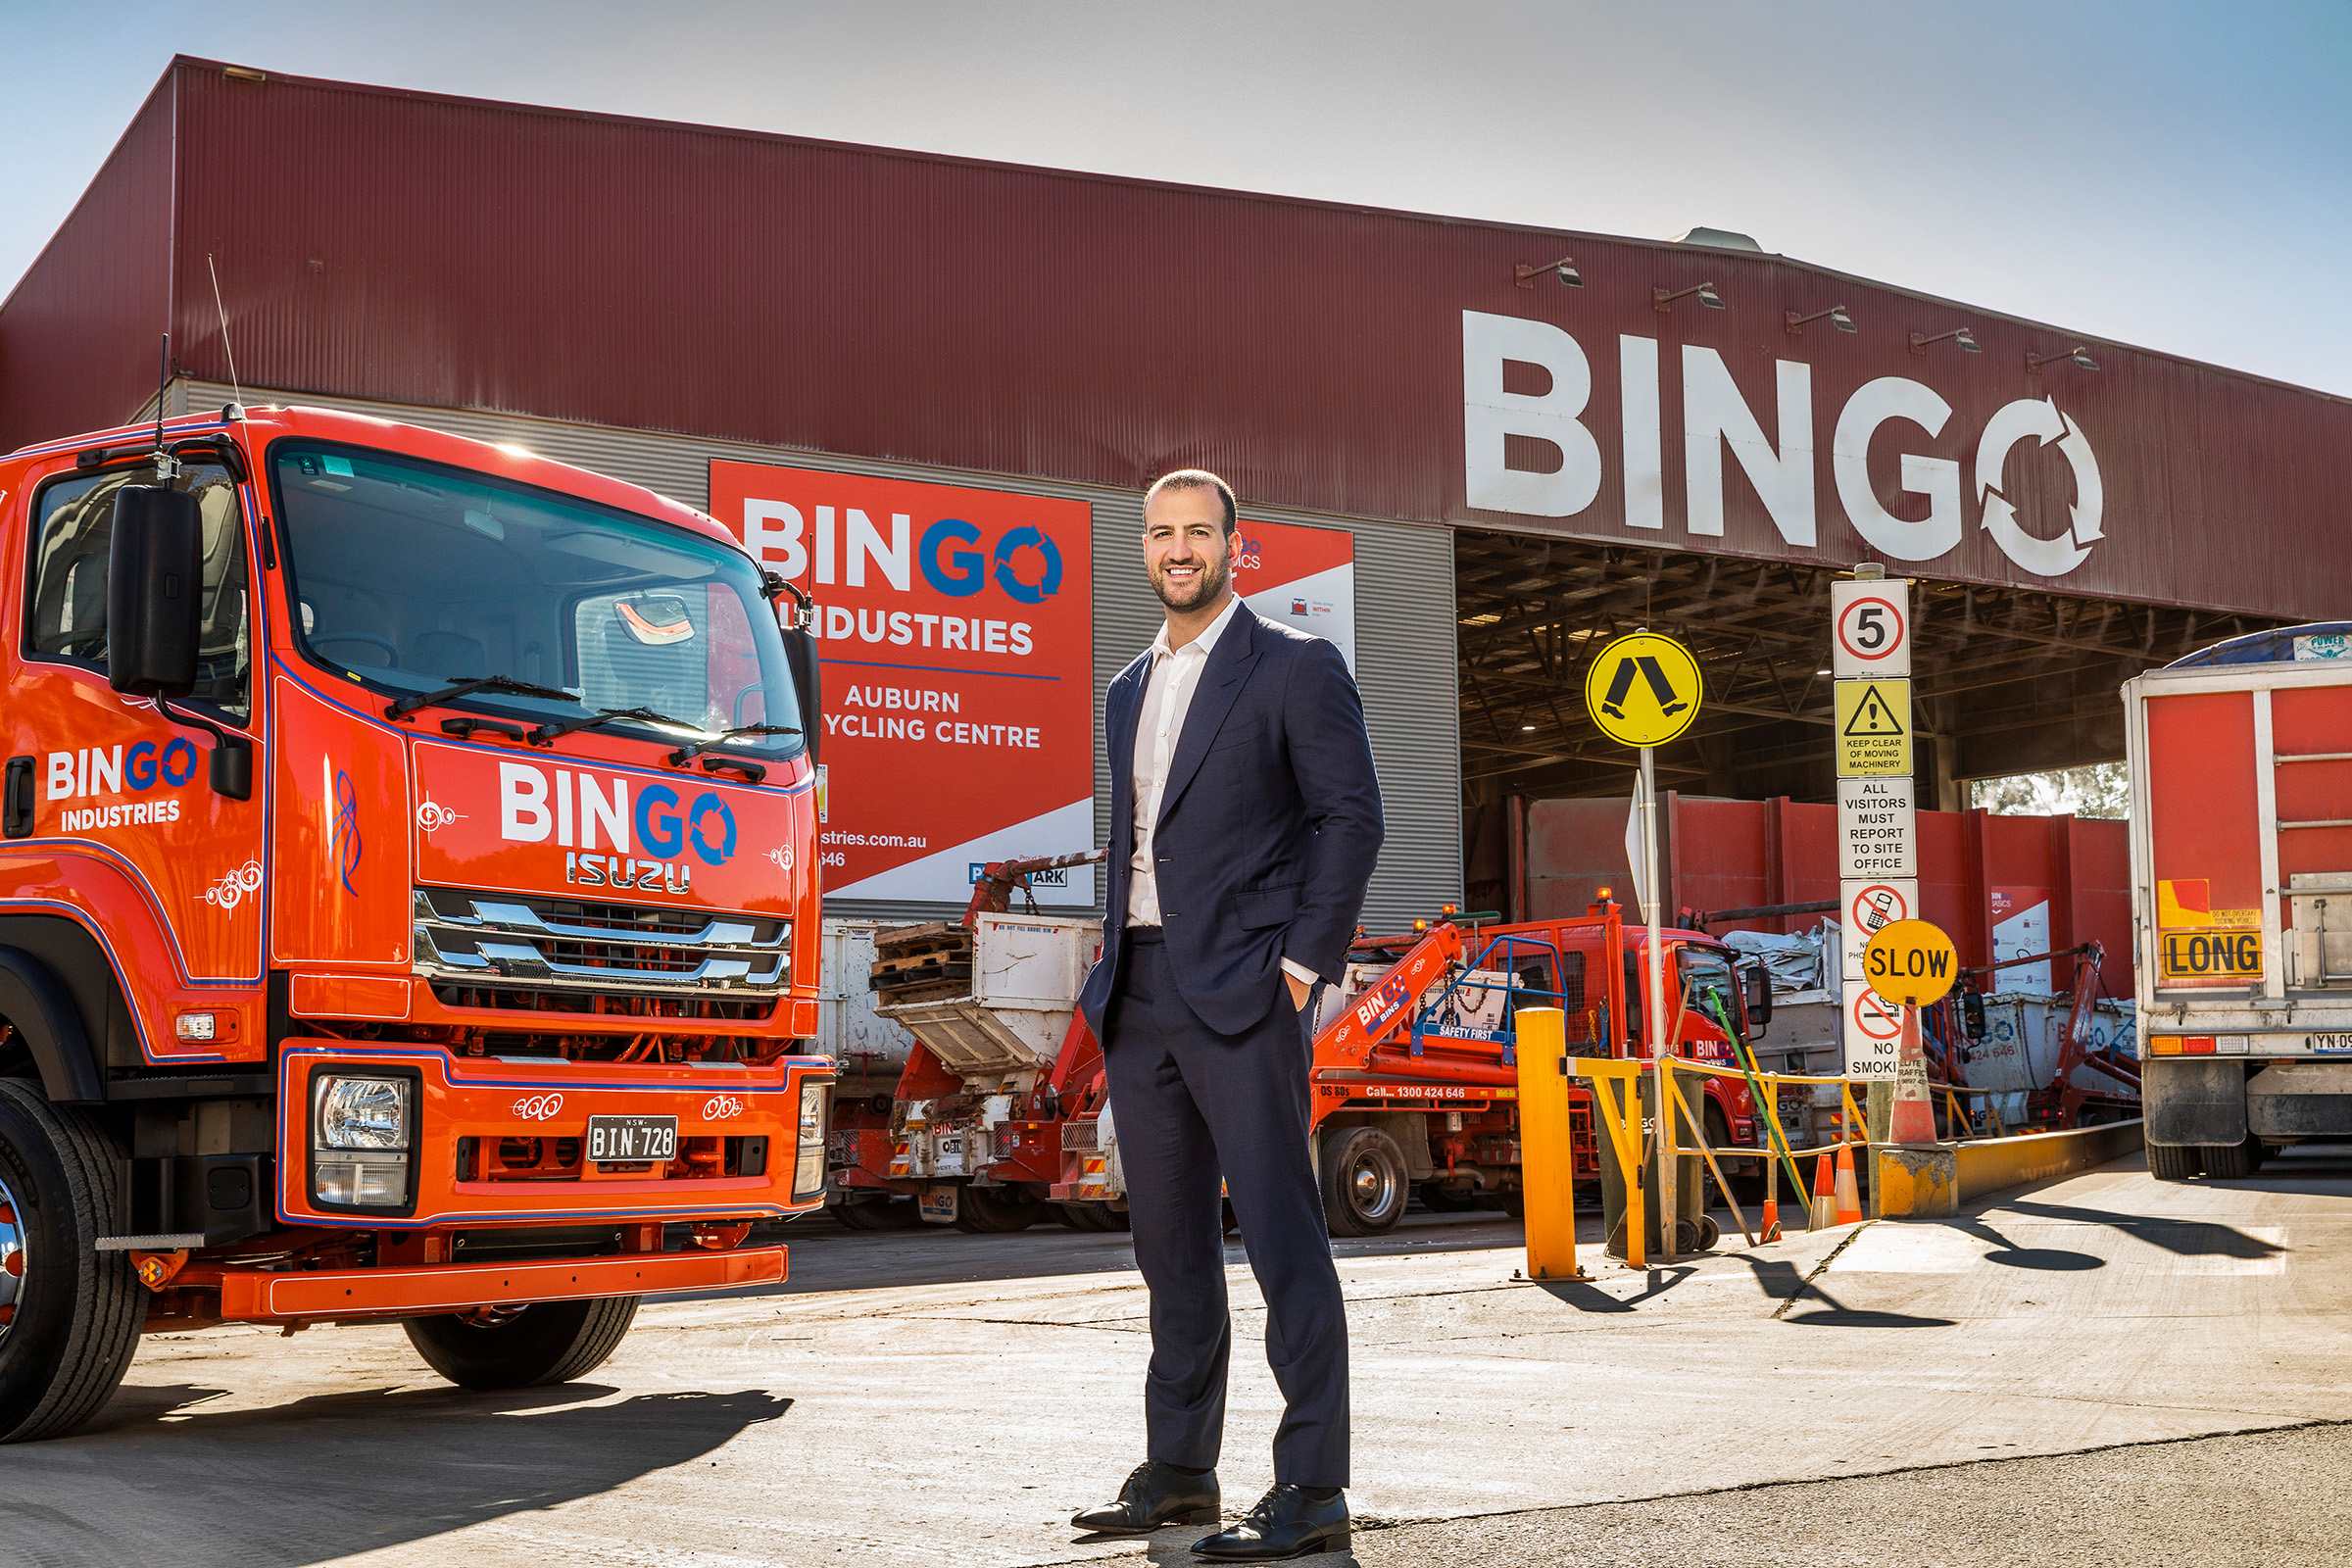 Corporate editorial location CEO photography Daniel Tartak BinGo recycling centre and truck background